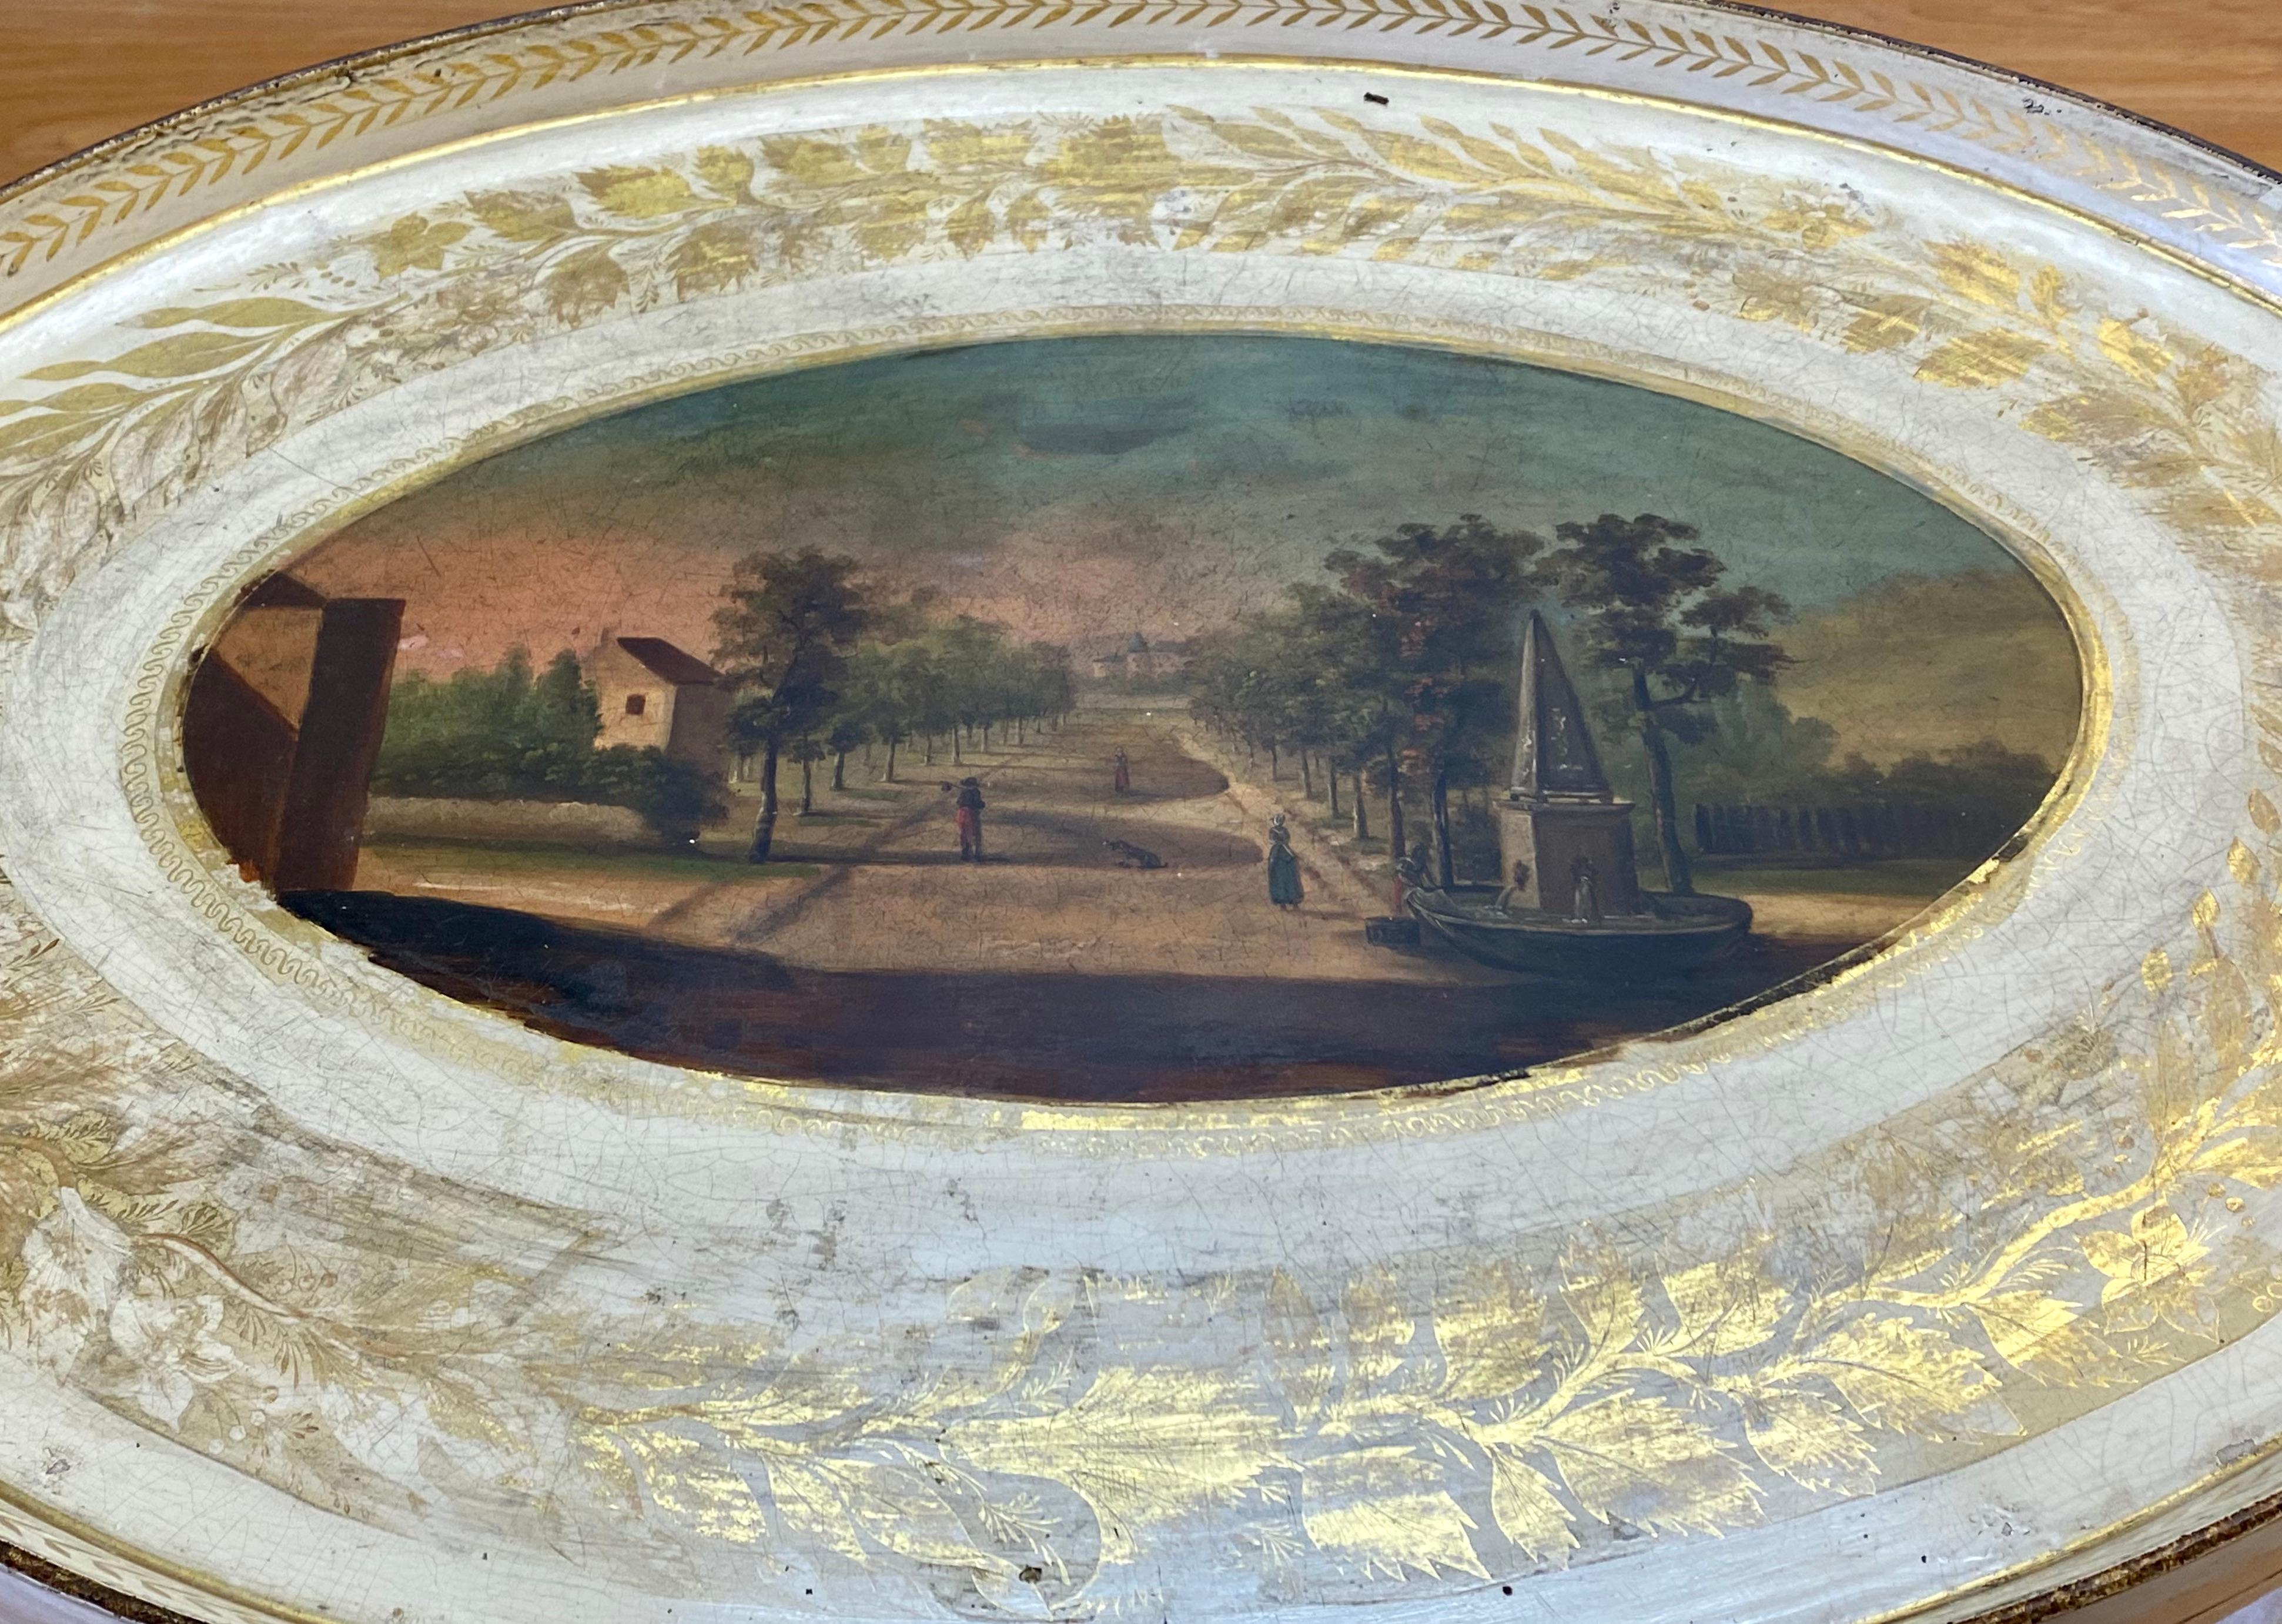 Hand painted european garden scene on metal tray on stand with glass insert, circa 1940.

A beautiful hand painted scene with ample remains of the gilded wreath surrounding the tray

A glass insert is included

The tray is